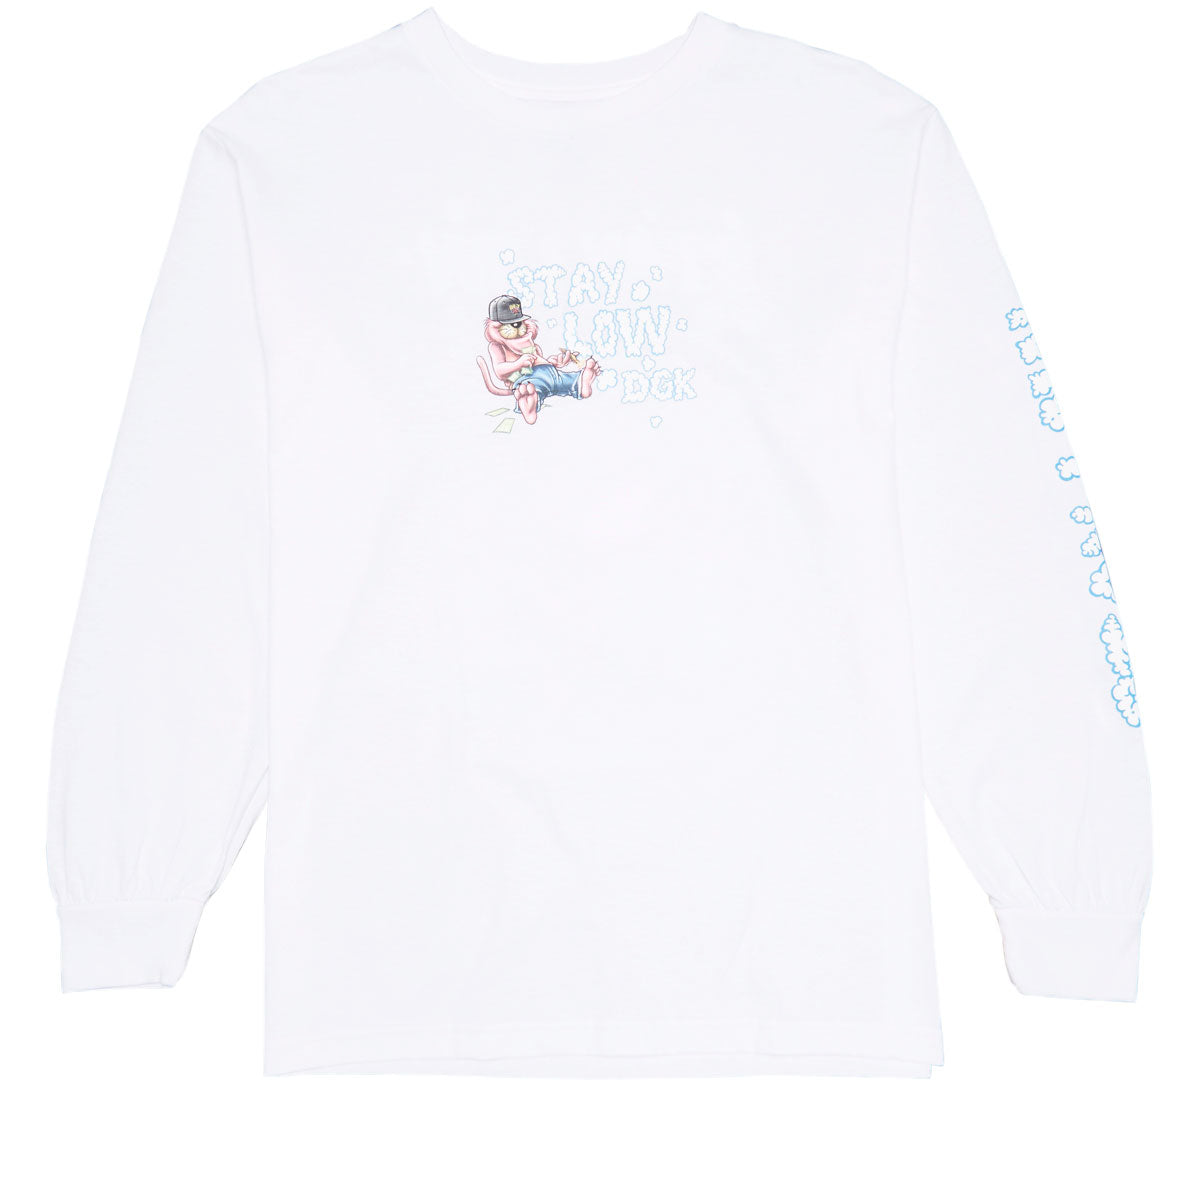 DGK Stay Low Long Sleeve T-Shirt - White image 2